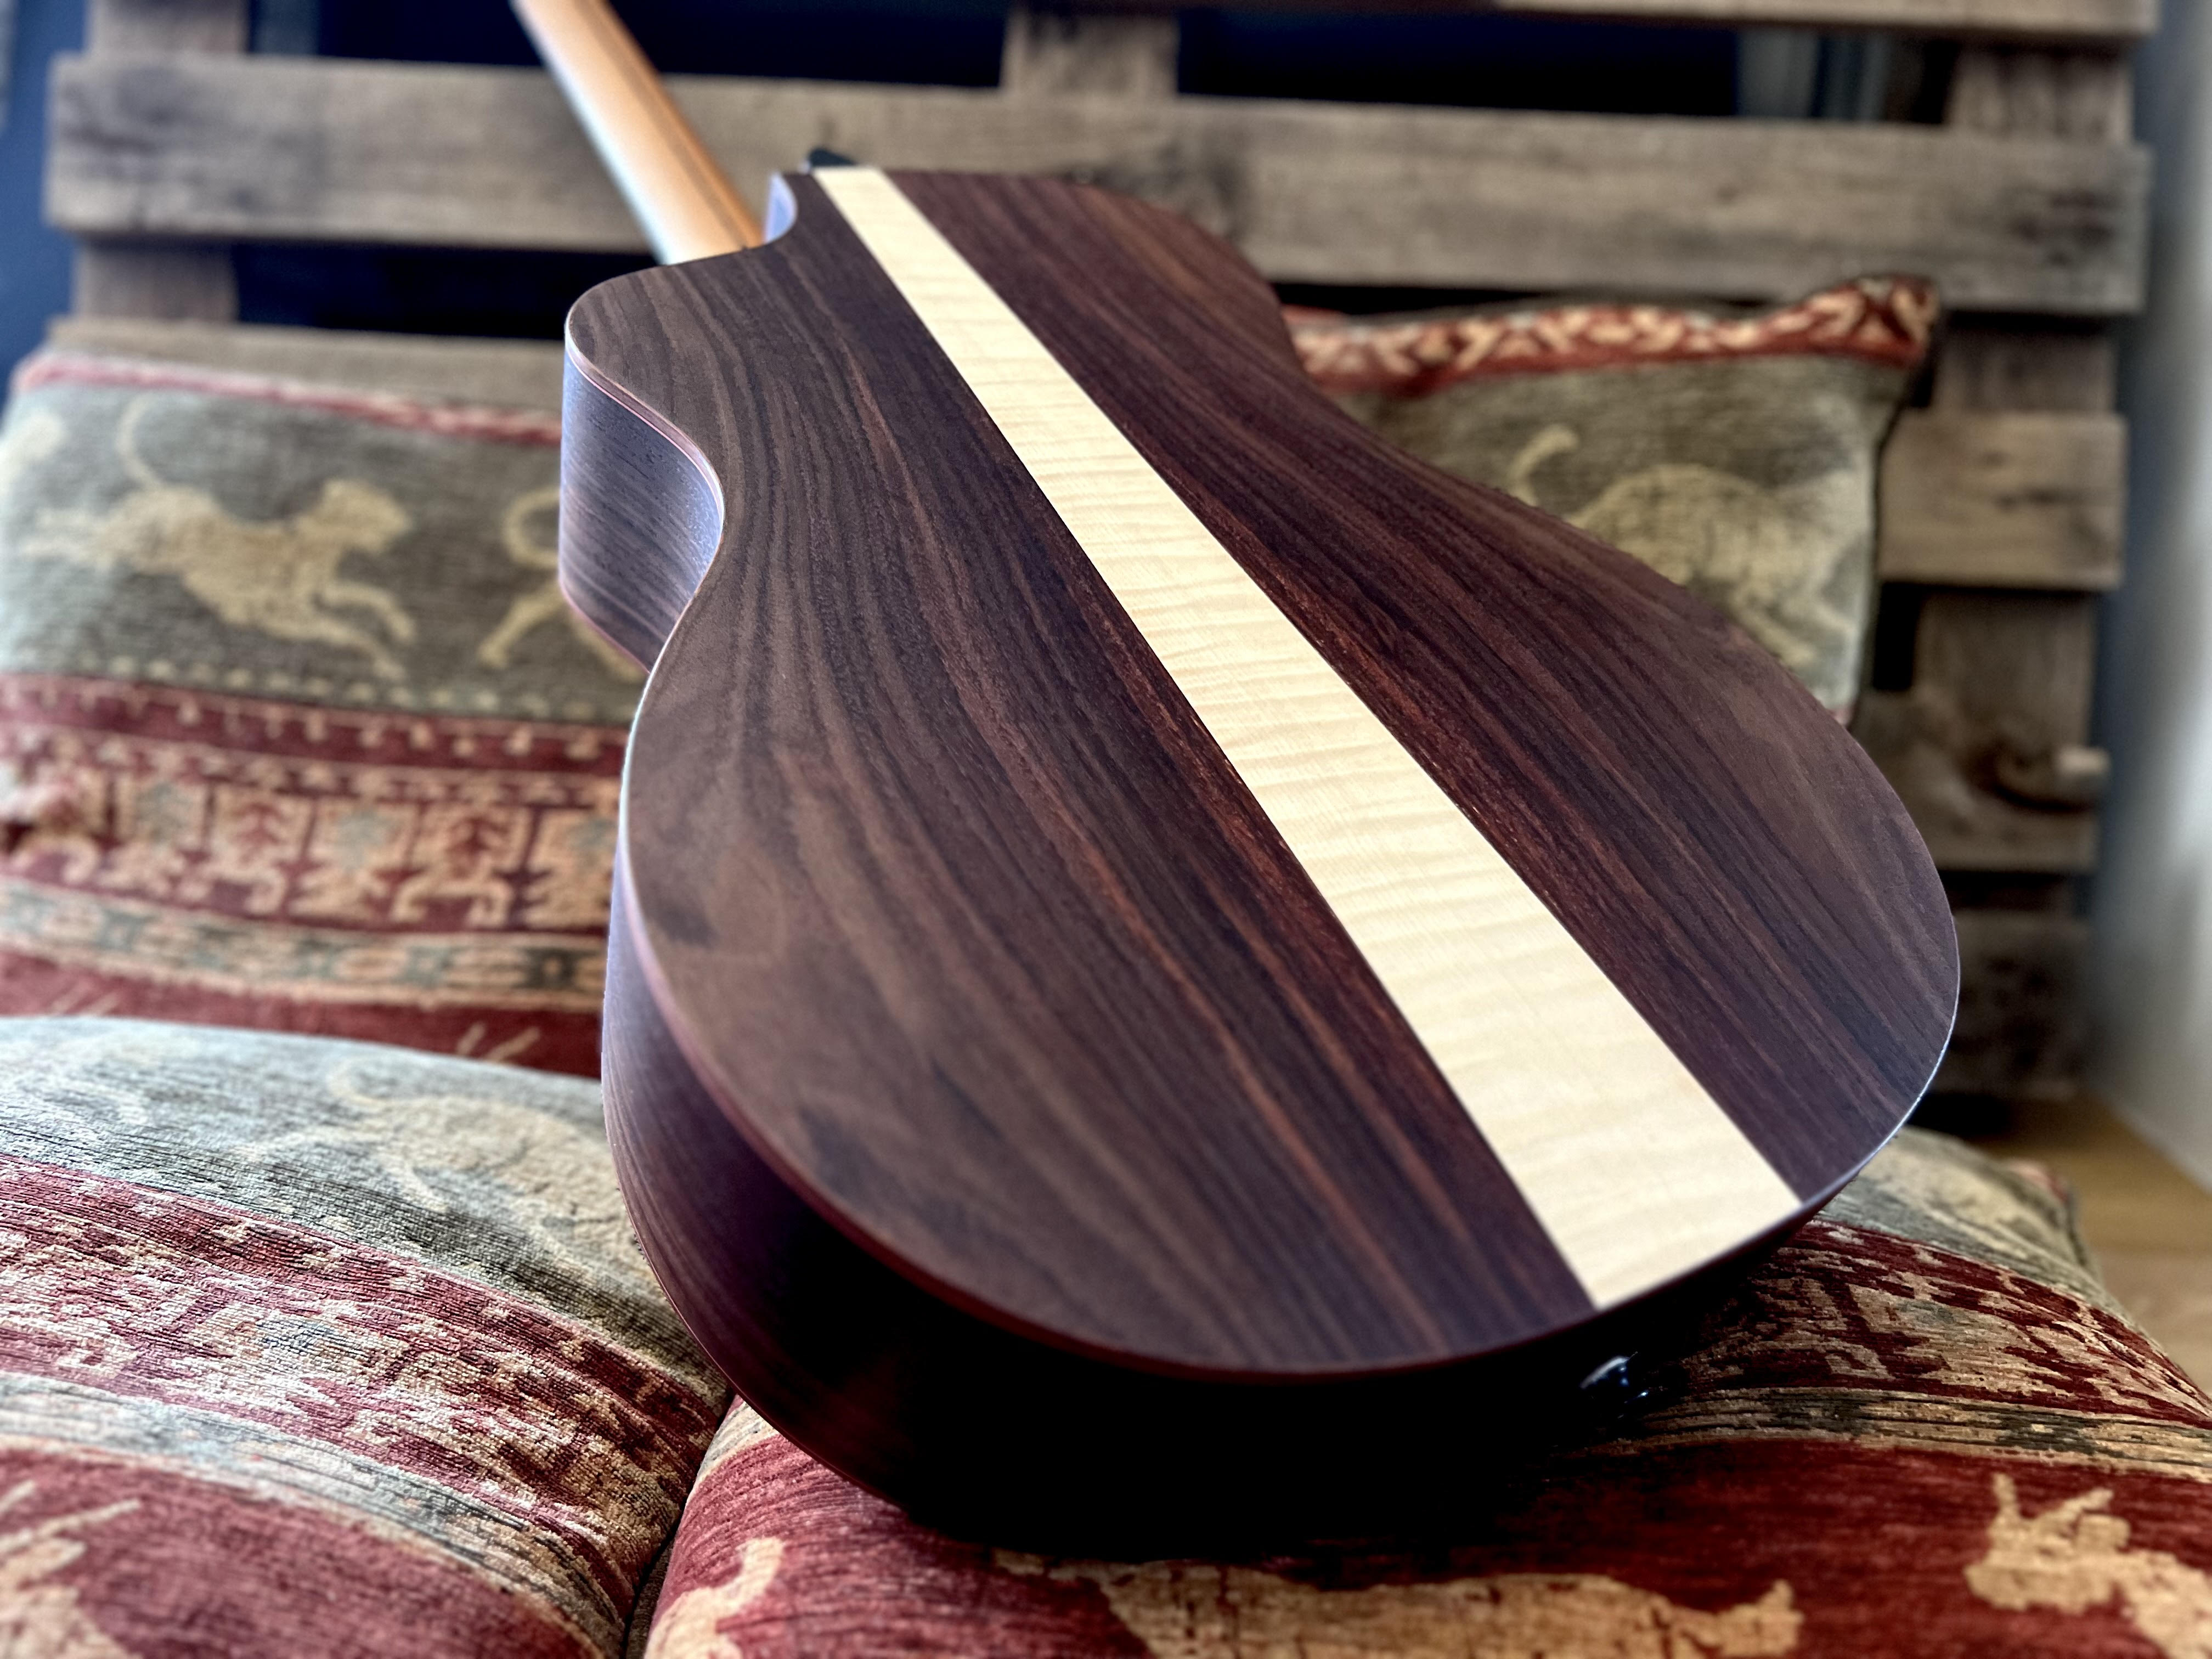 Dowina Guitars: The "Trio Plate" For Added Luxury & Style